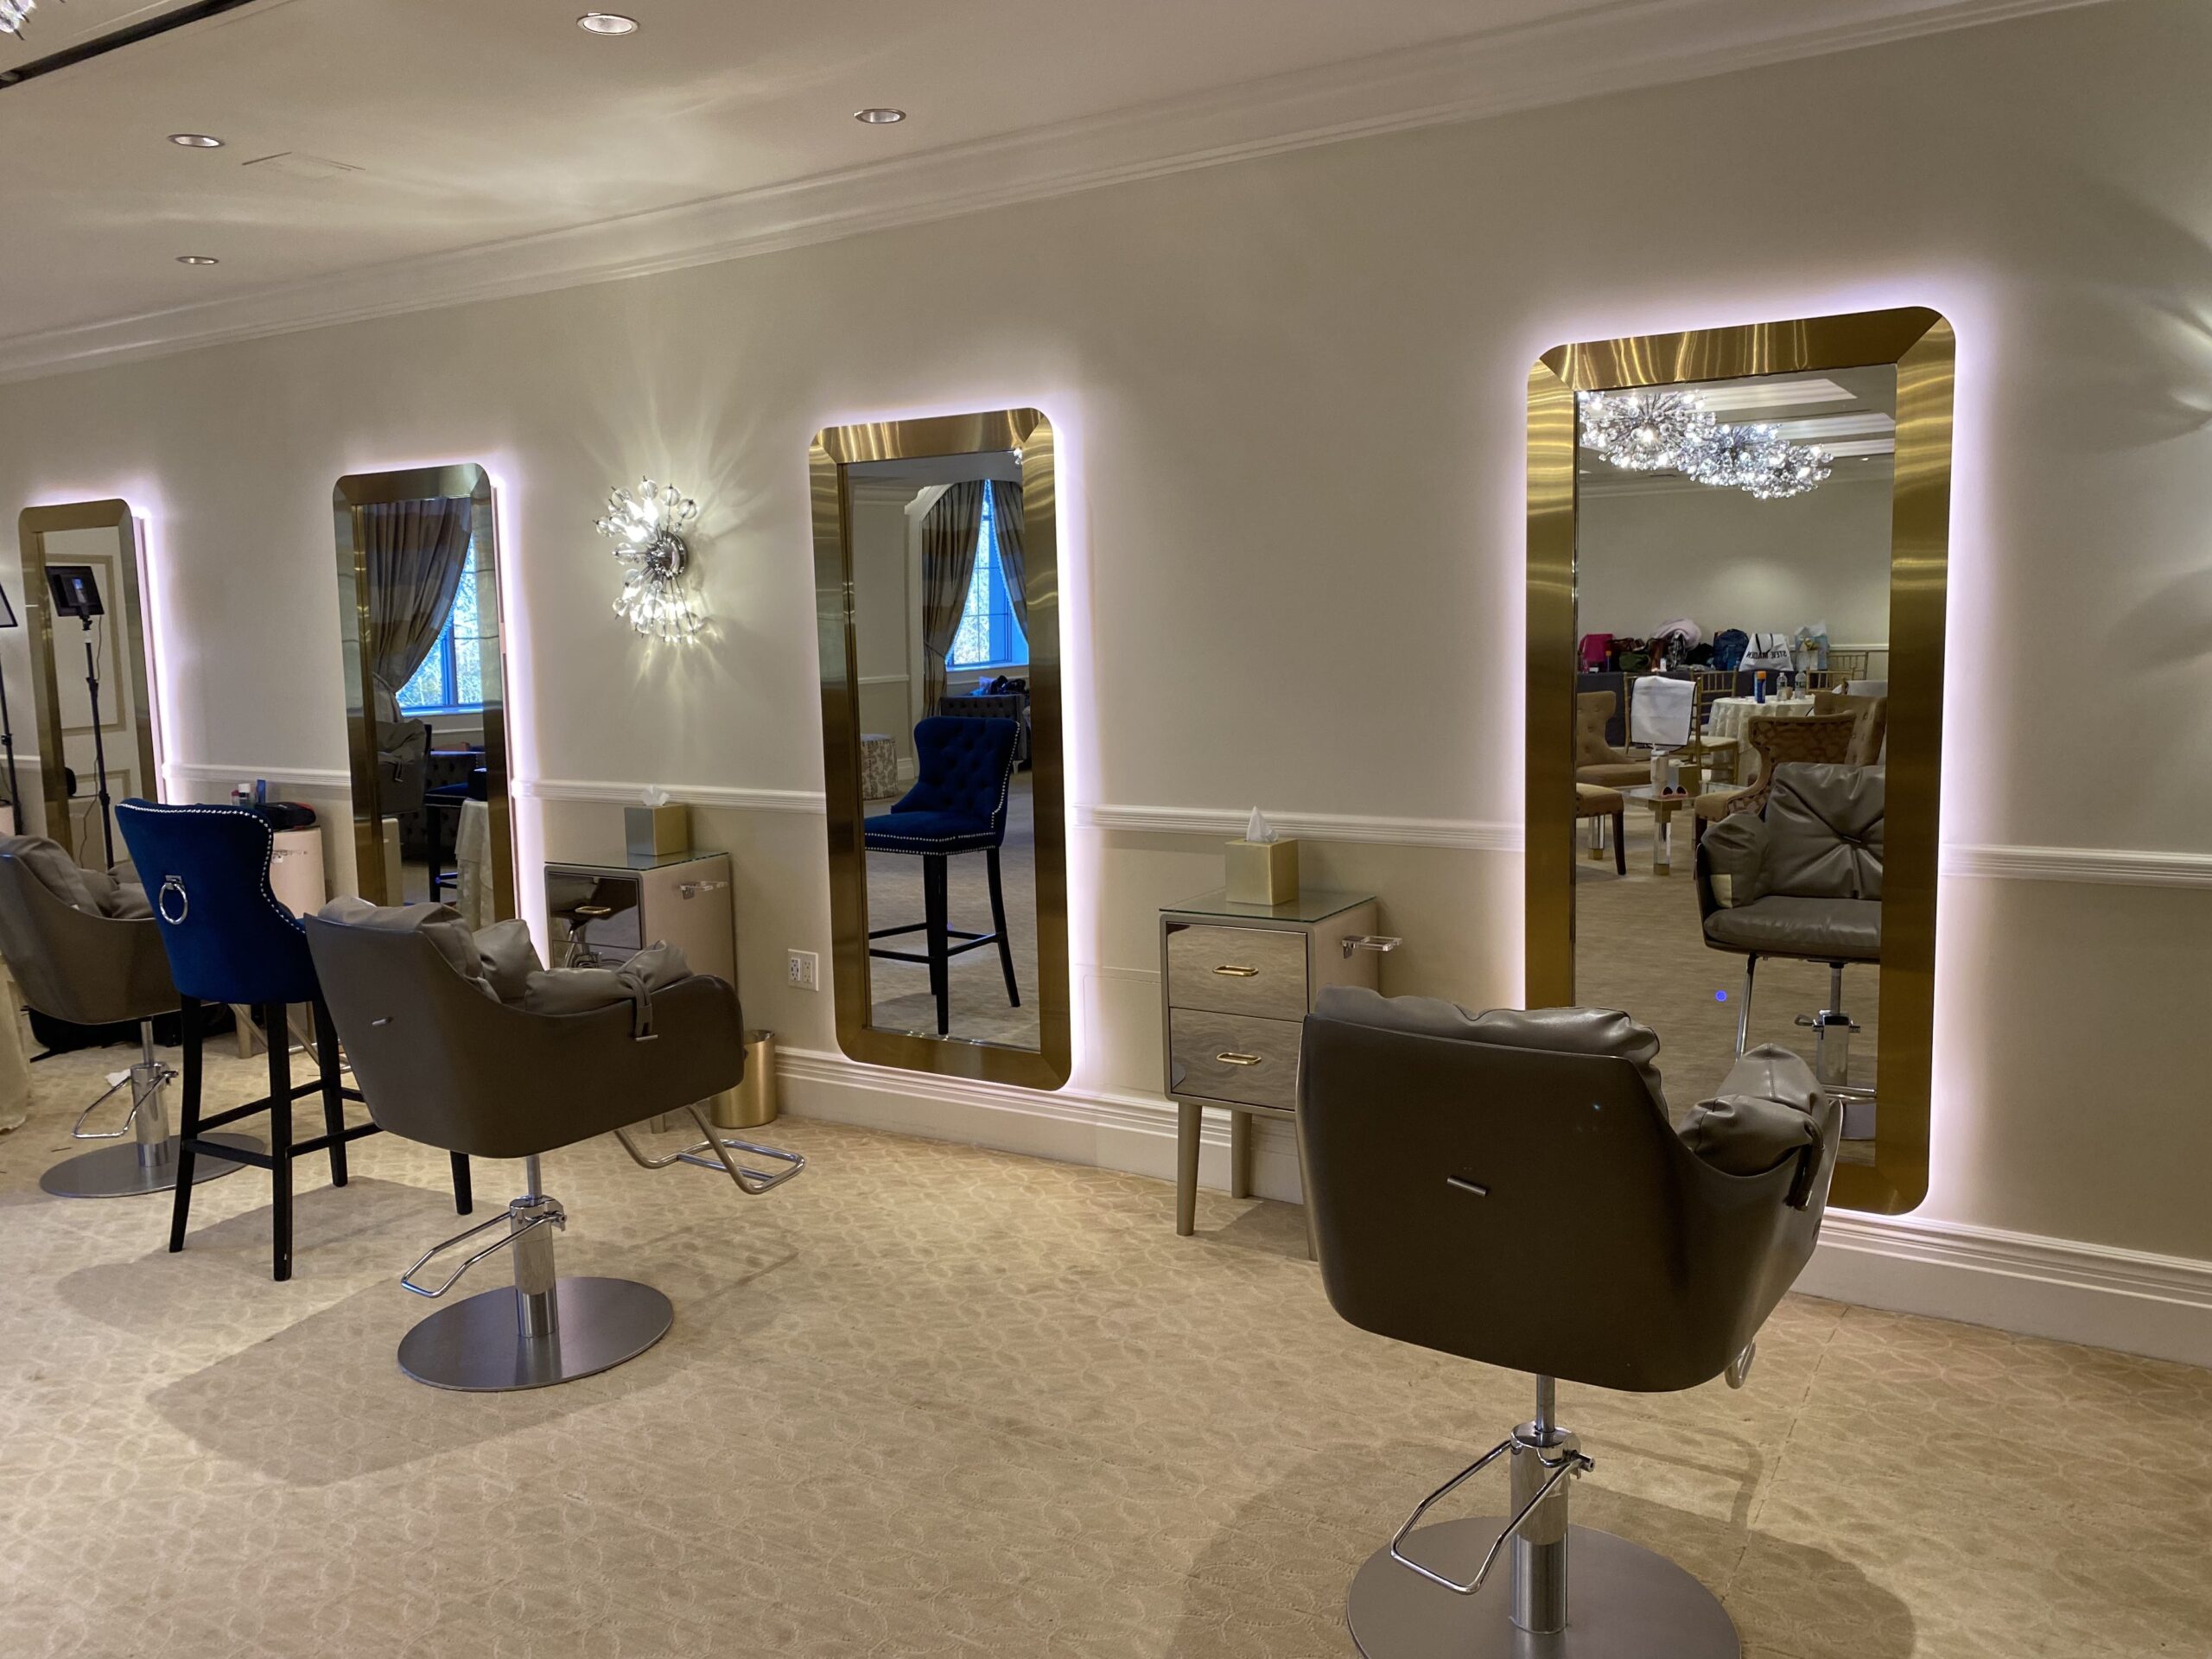 The bridal suite and salon as seen during a the Grove tour.